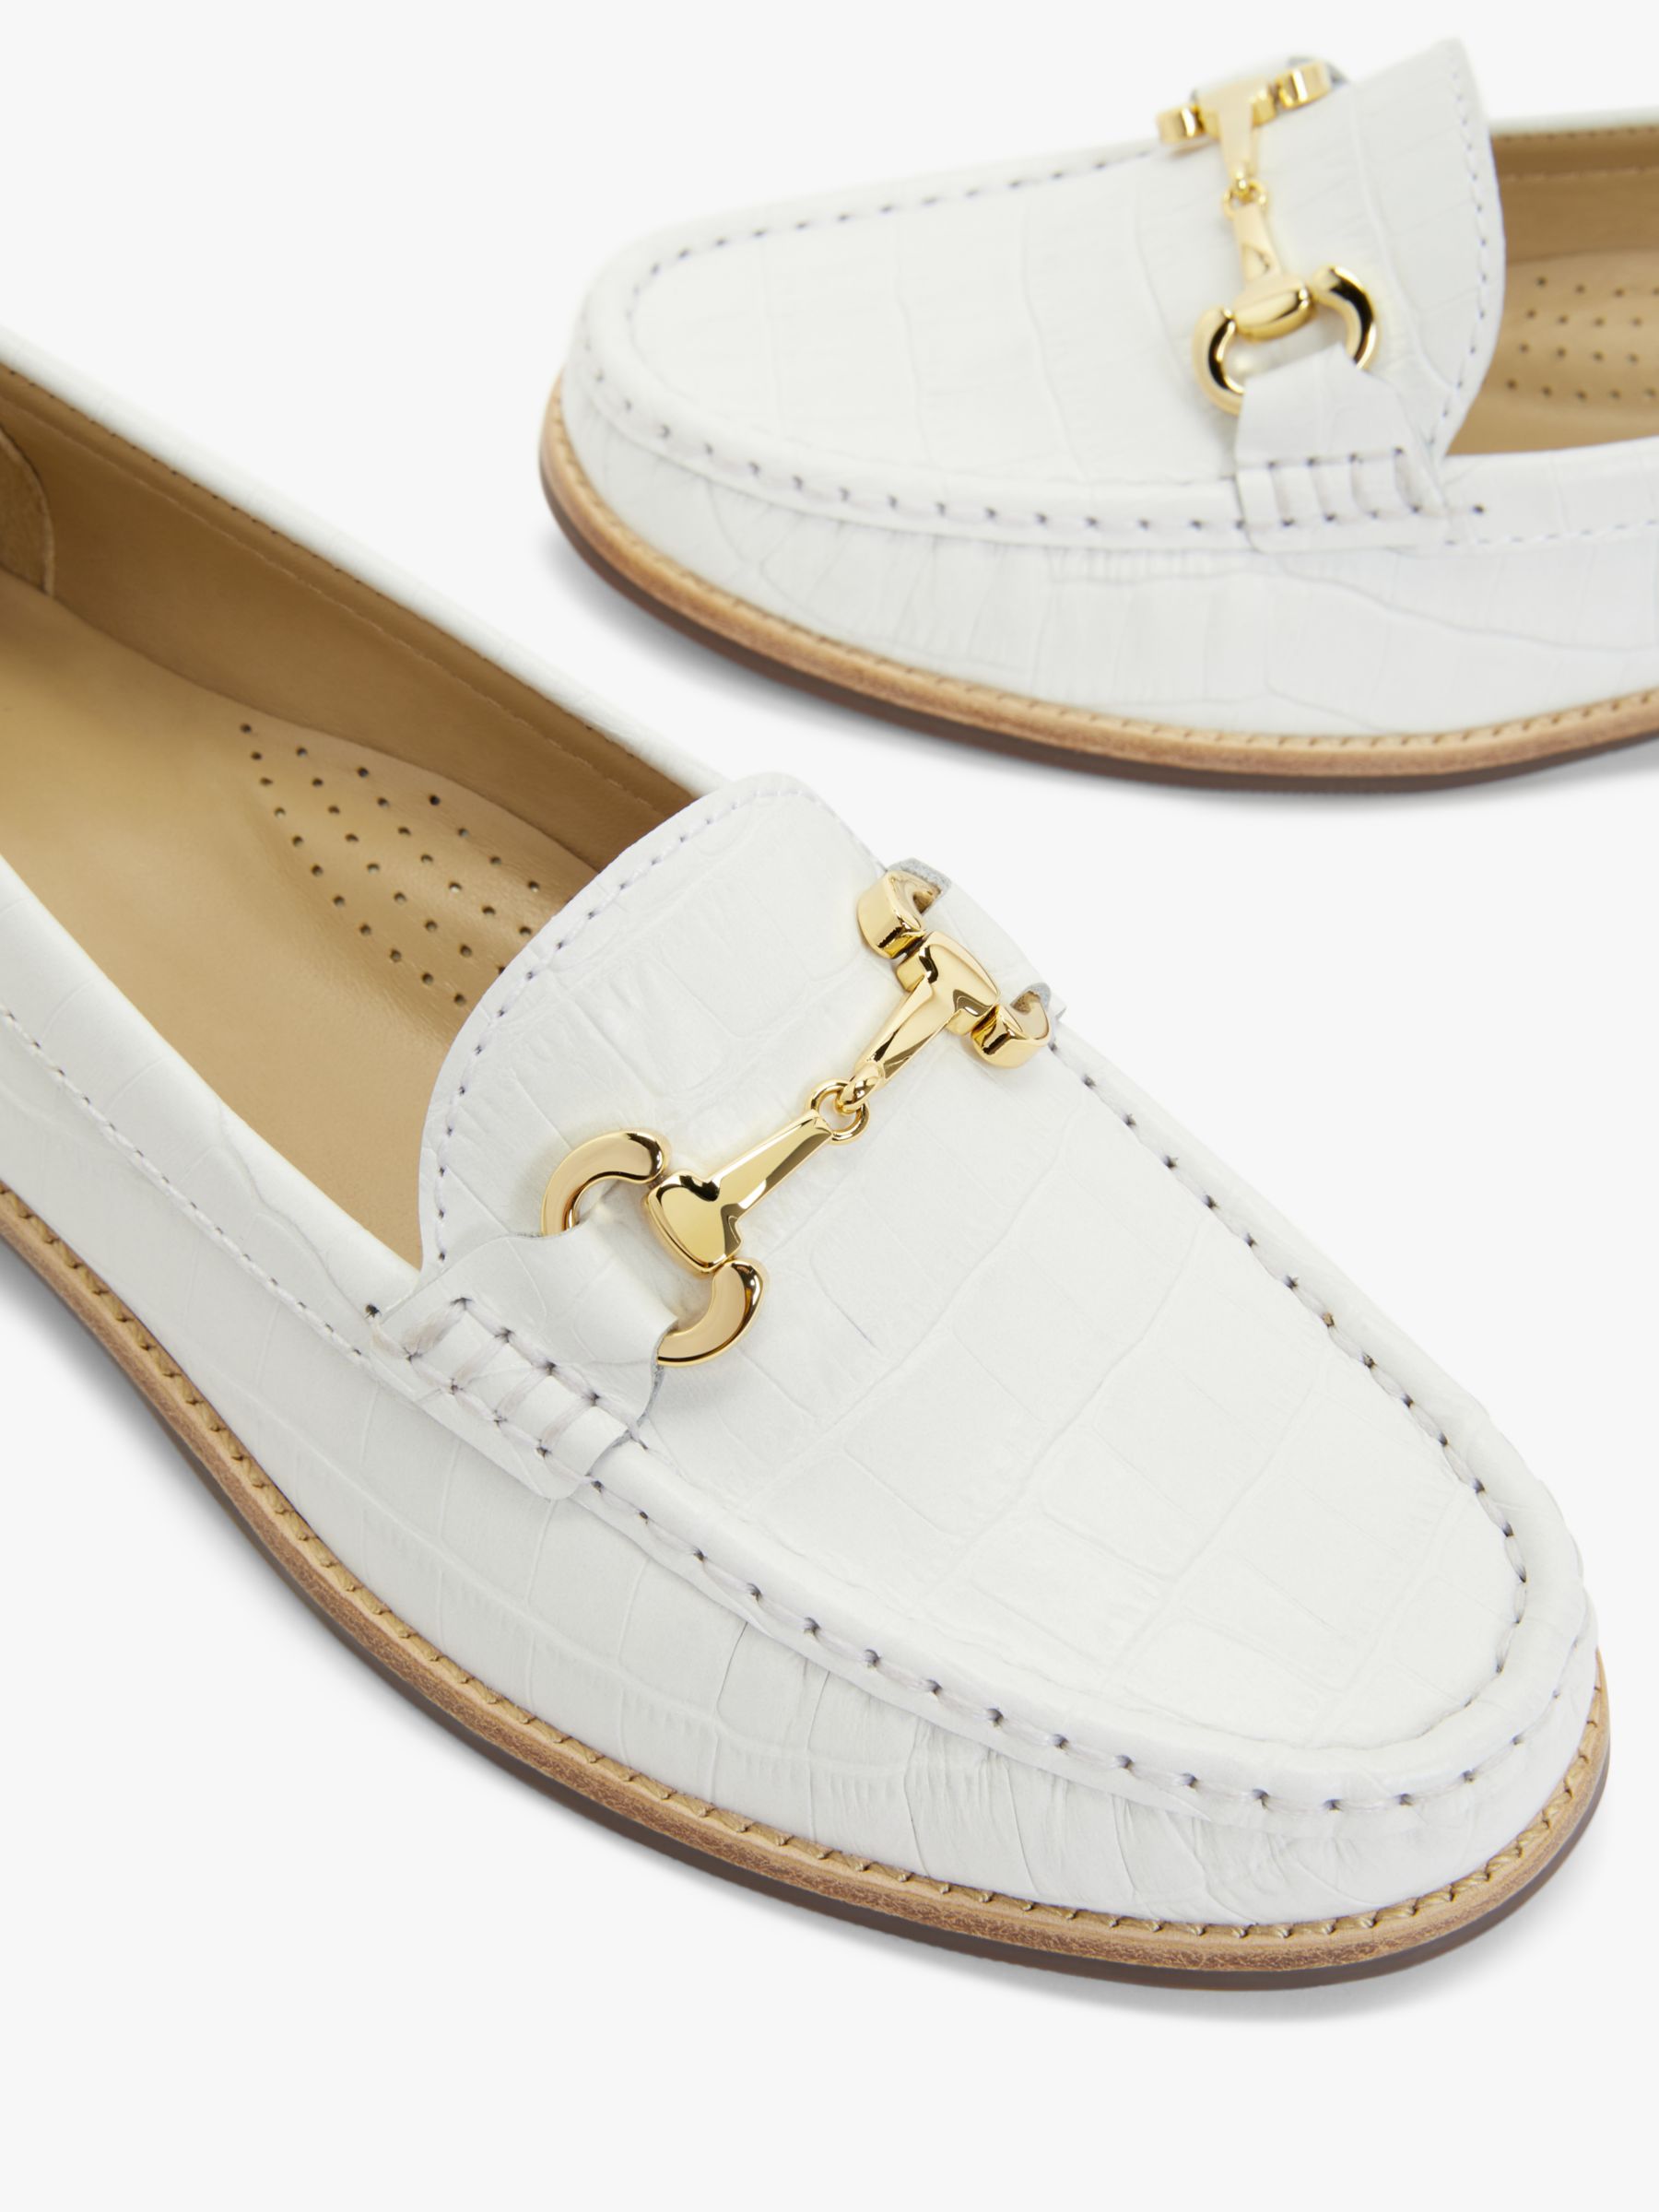 Buy John Lewis August Leather Moccasins Online at johnlewis.com